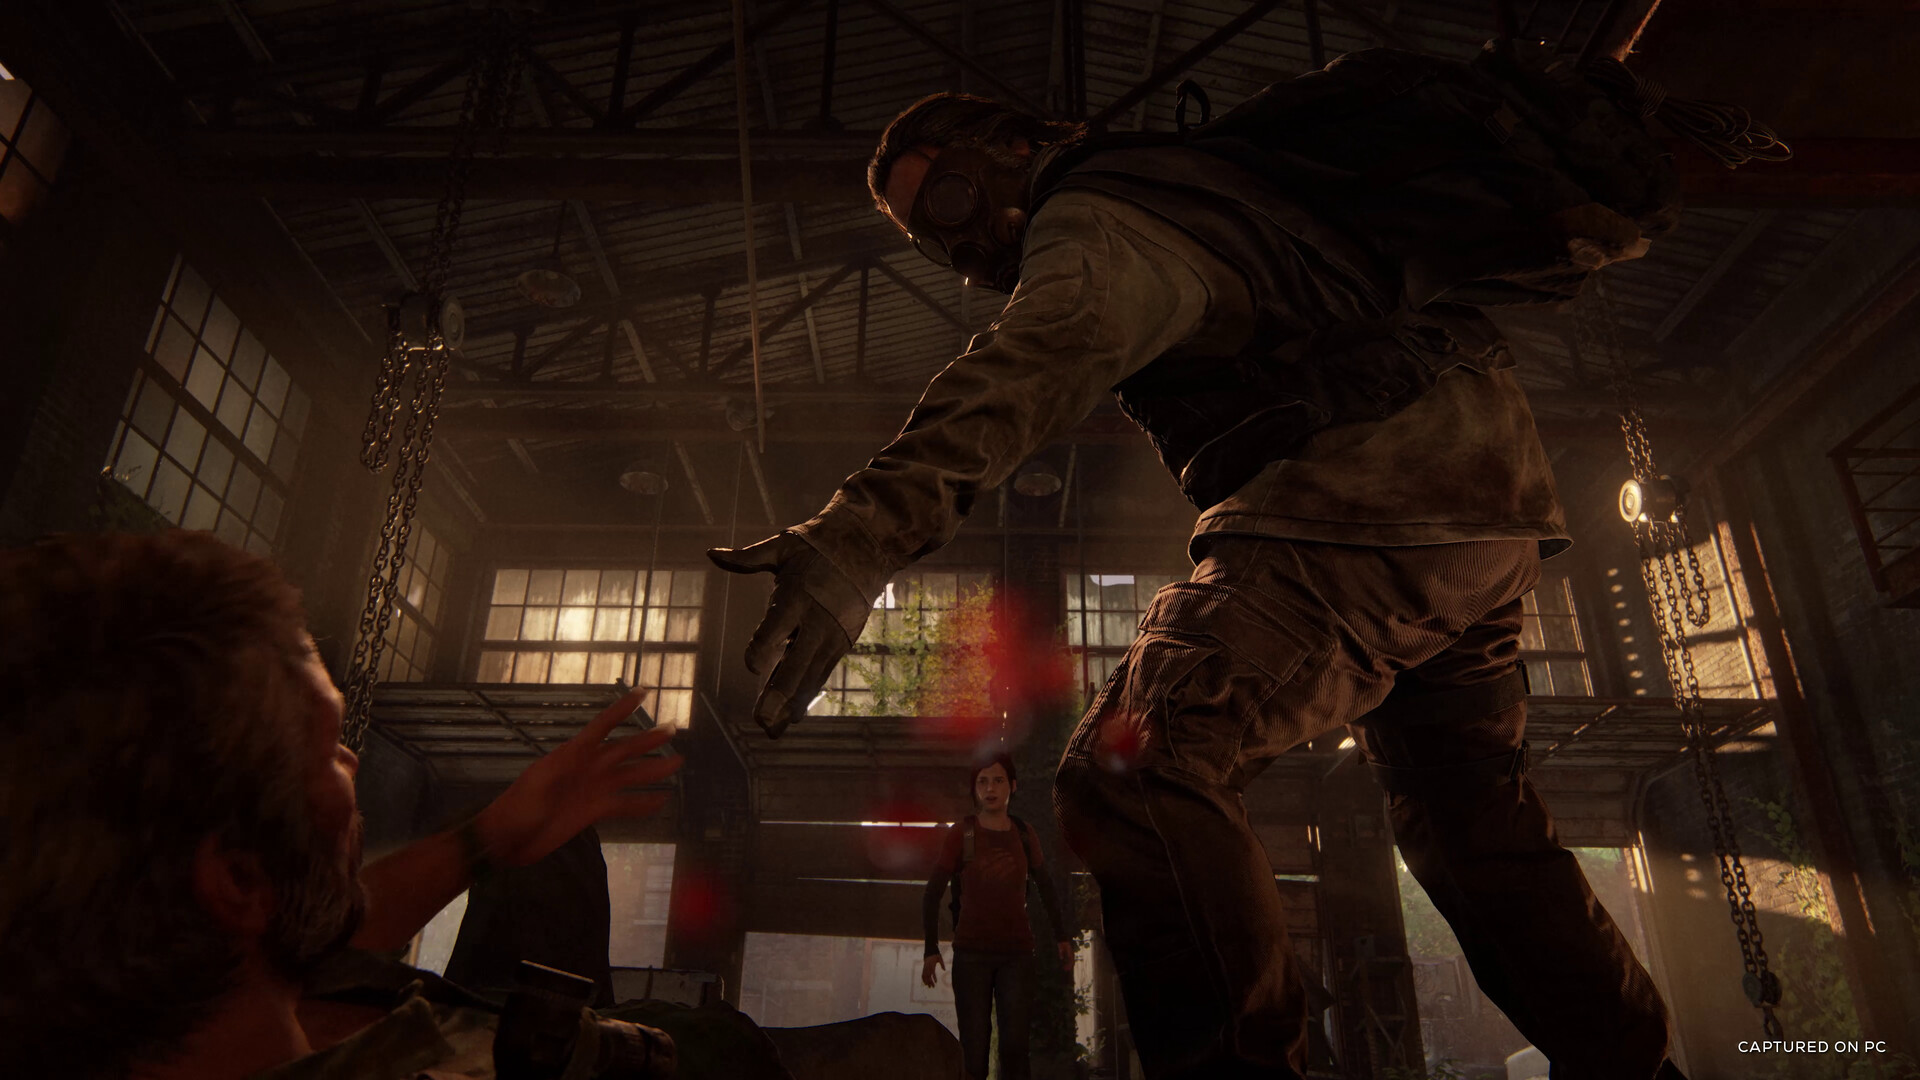 The Last of Us Part, Steam Deck Gameplay, Steam OS